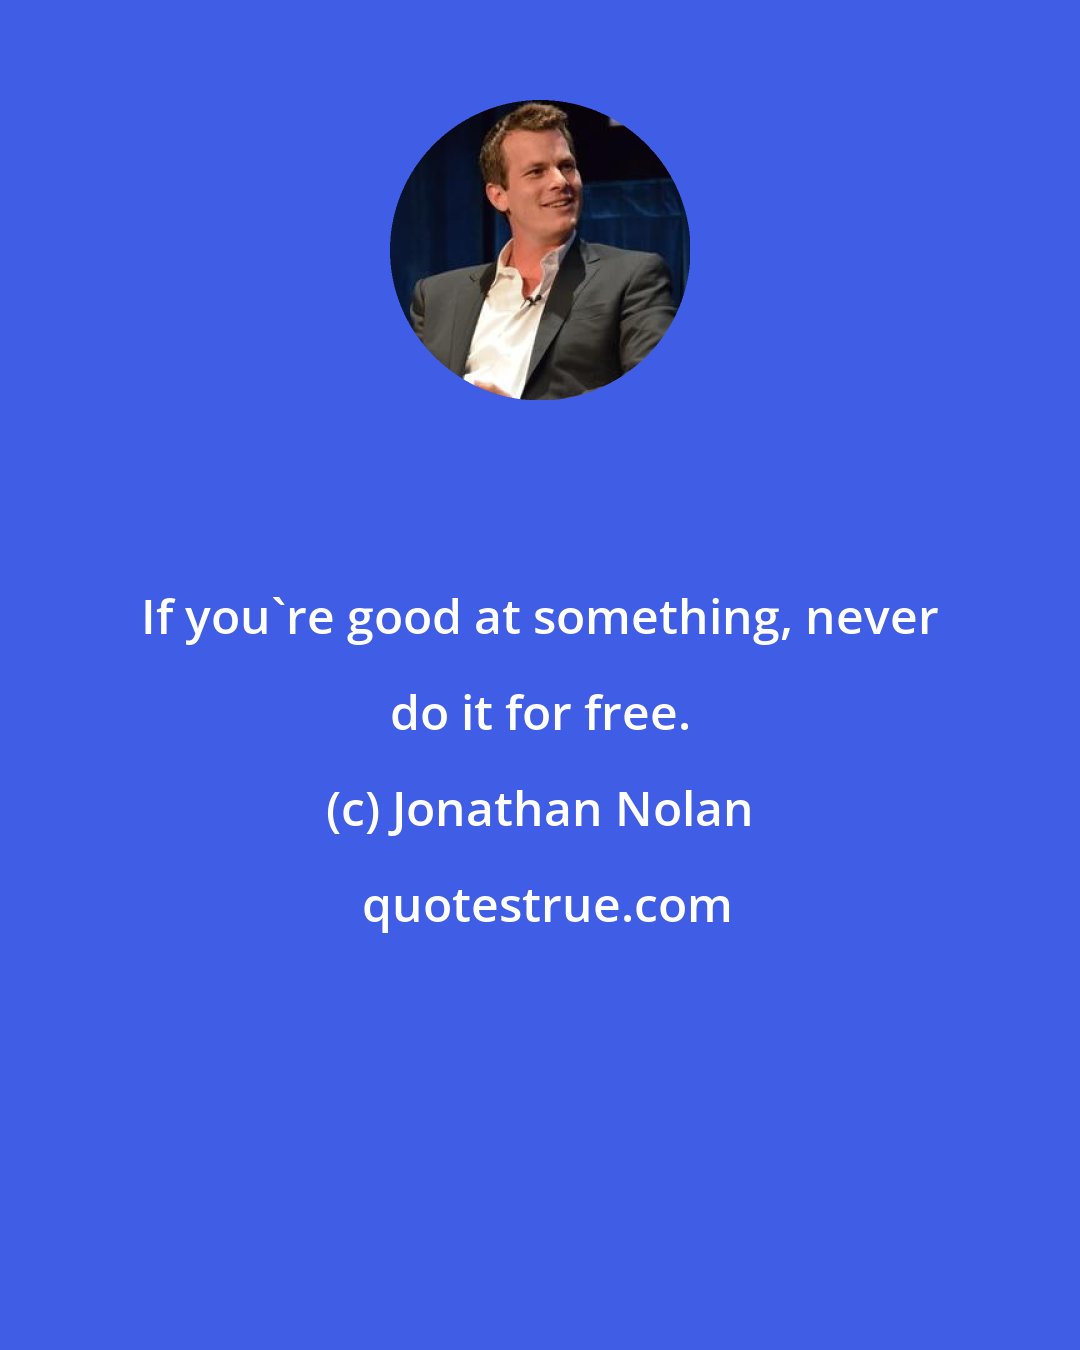 Jonathan Nolan: If you're good at something, never do it for free.